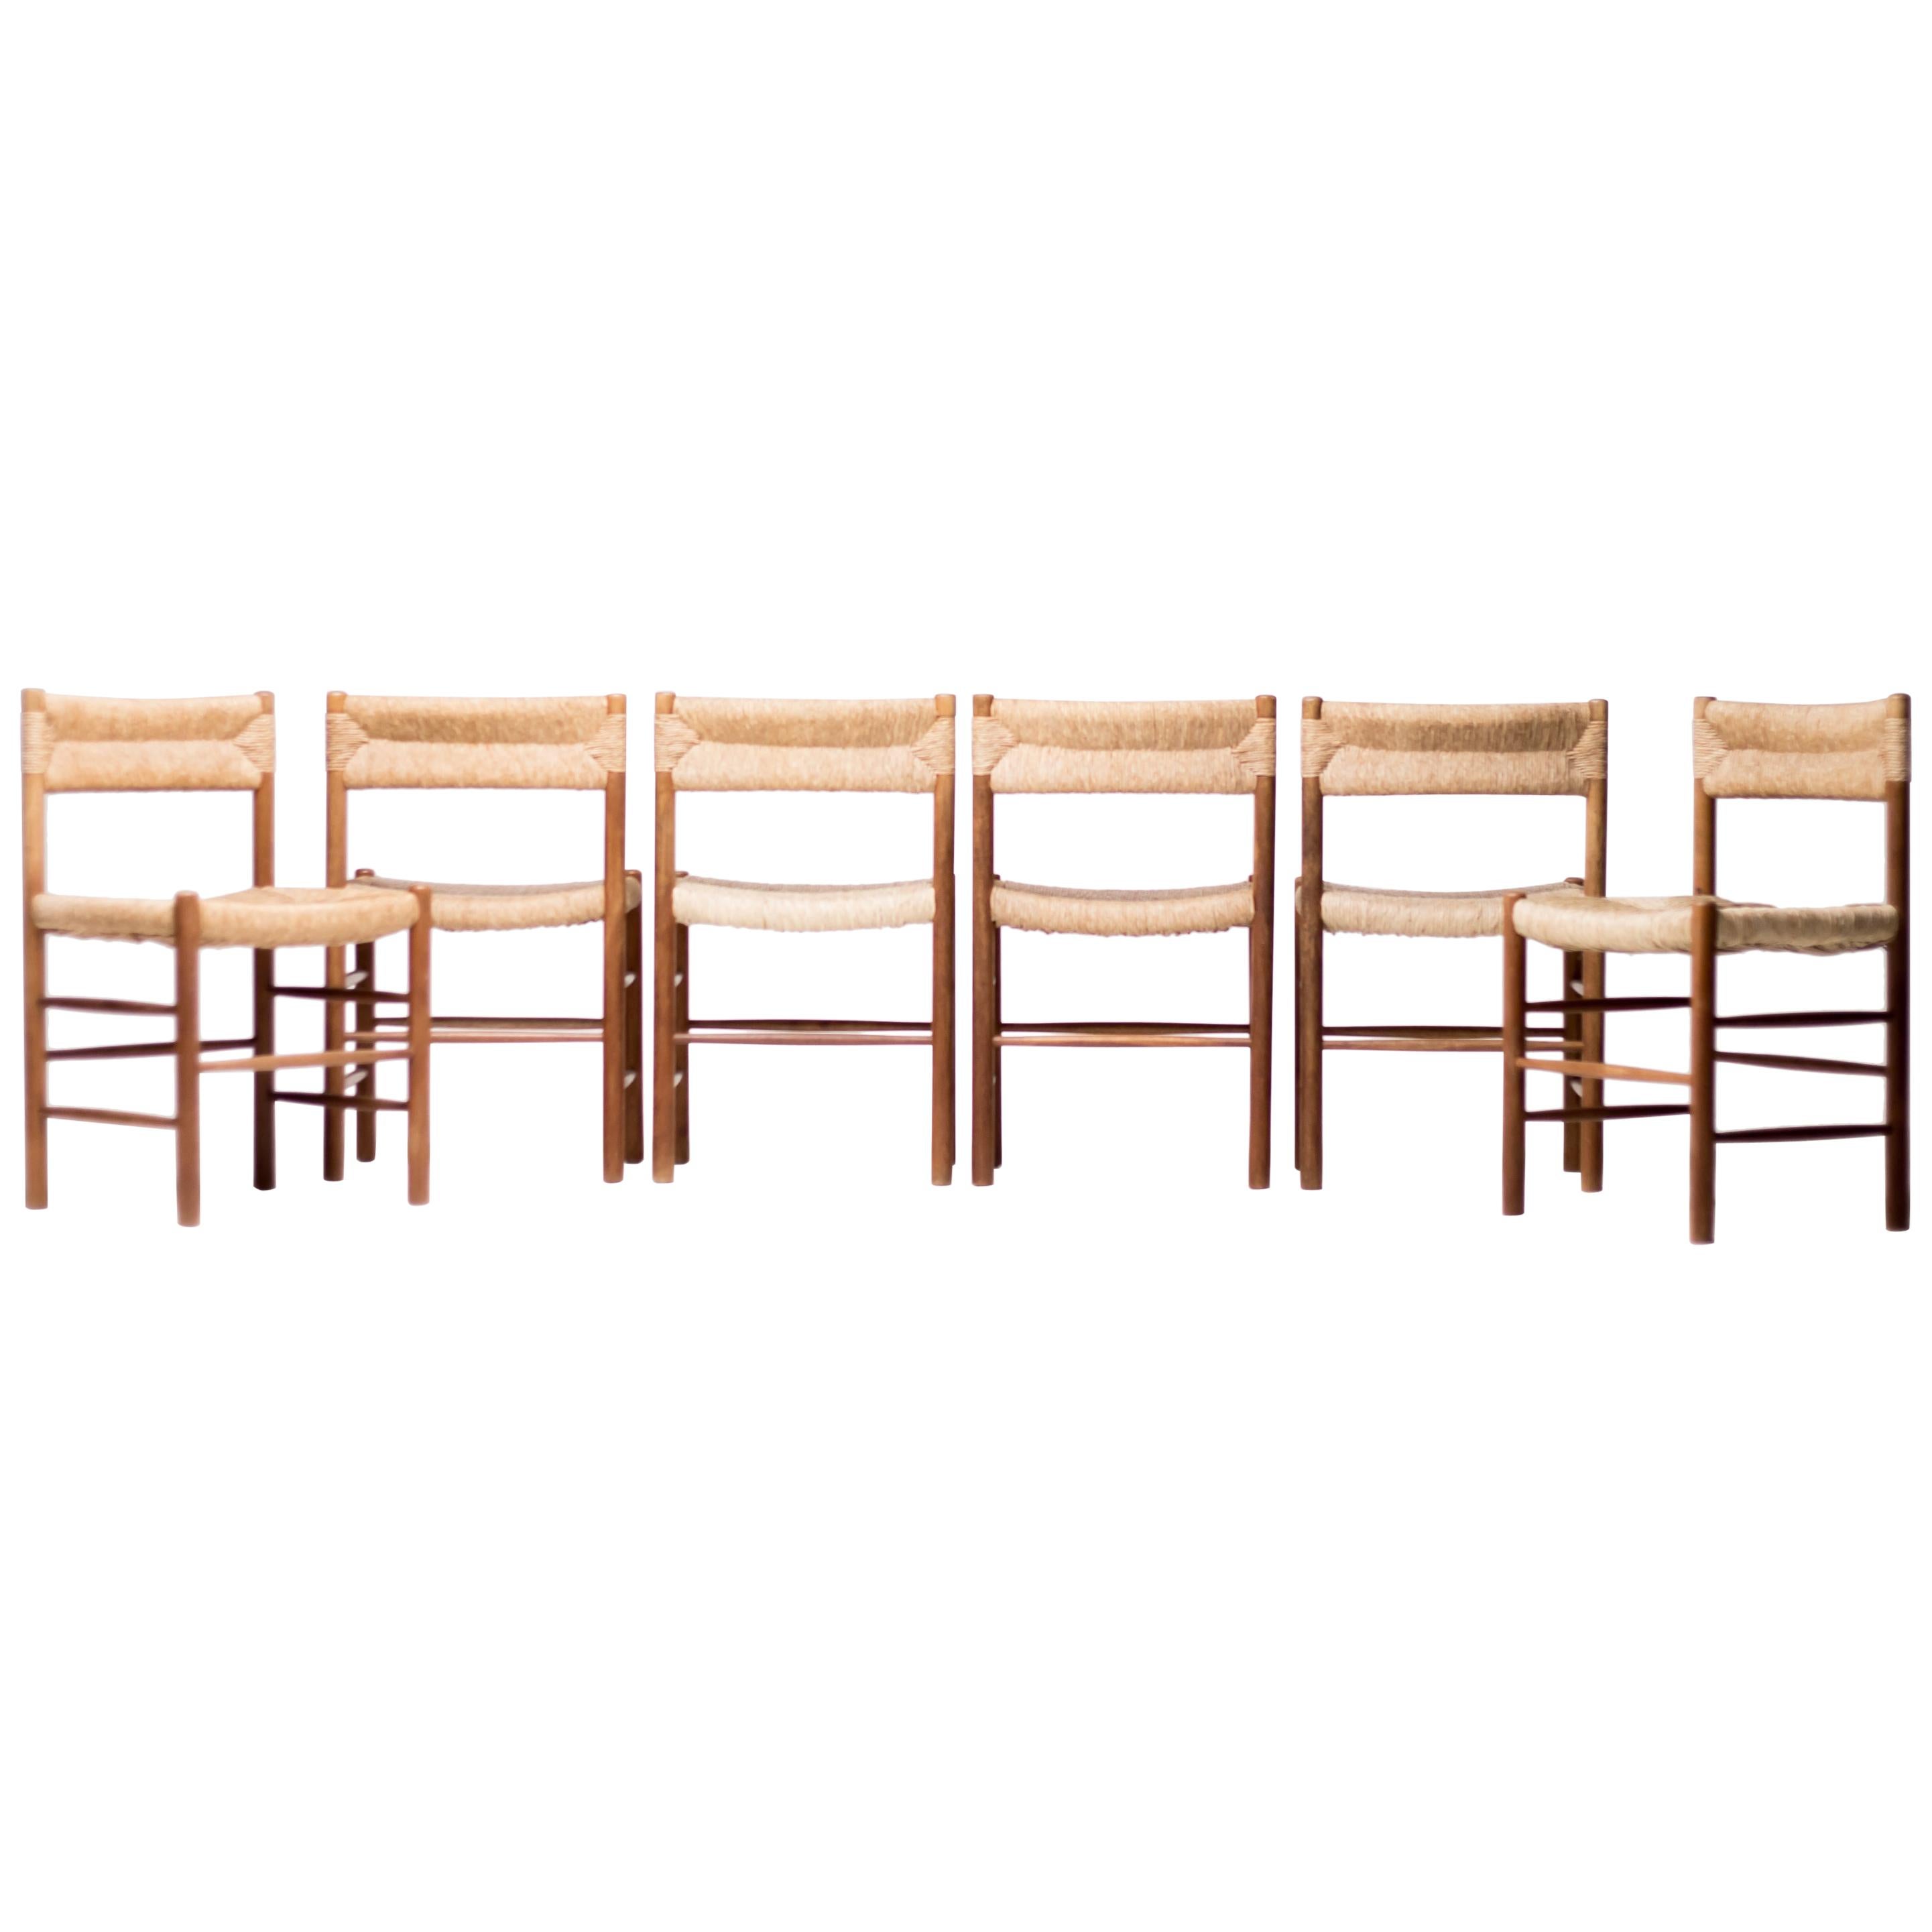 Set of Six Charlotte Perriand "Dordogne" Chairs